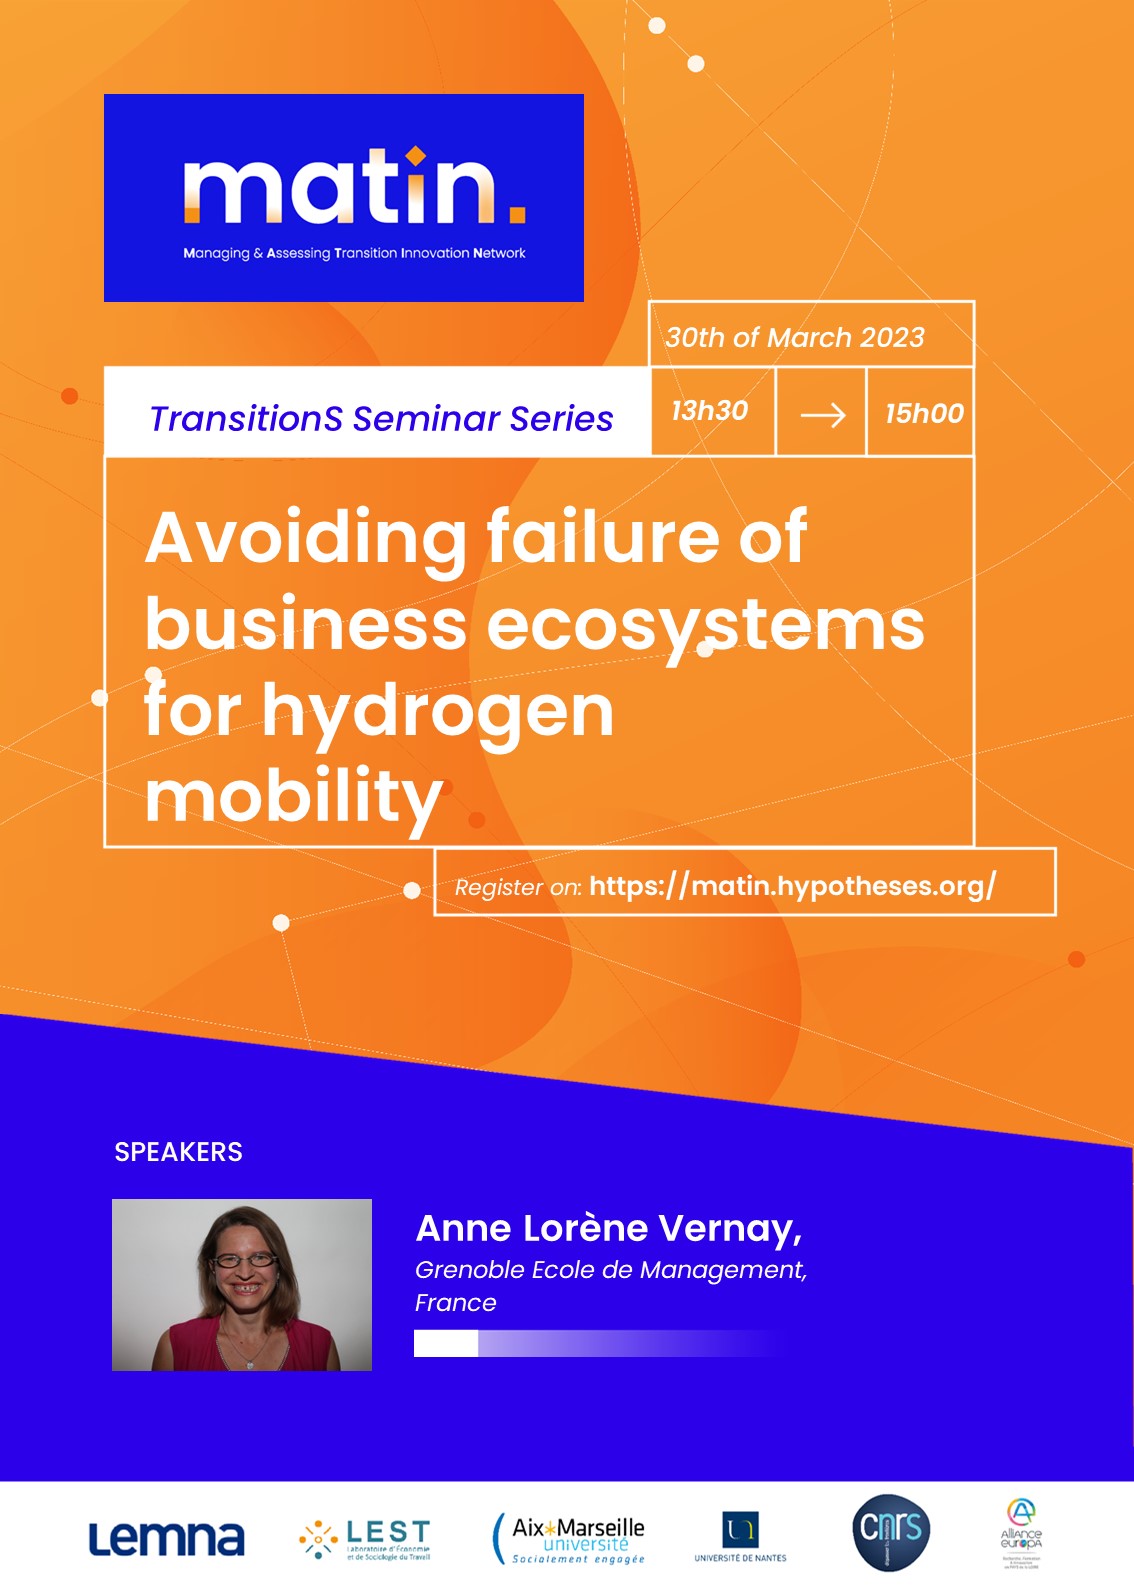 Avoiding failure of business ecosystems for hydrogen mobility